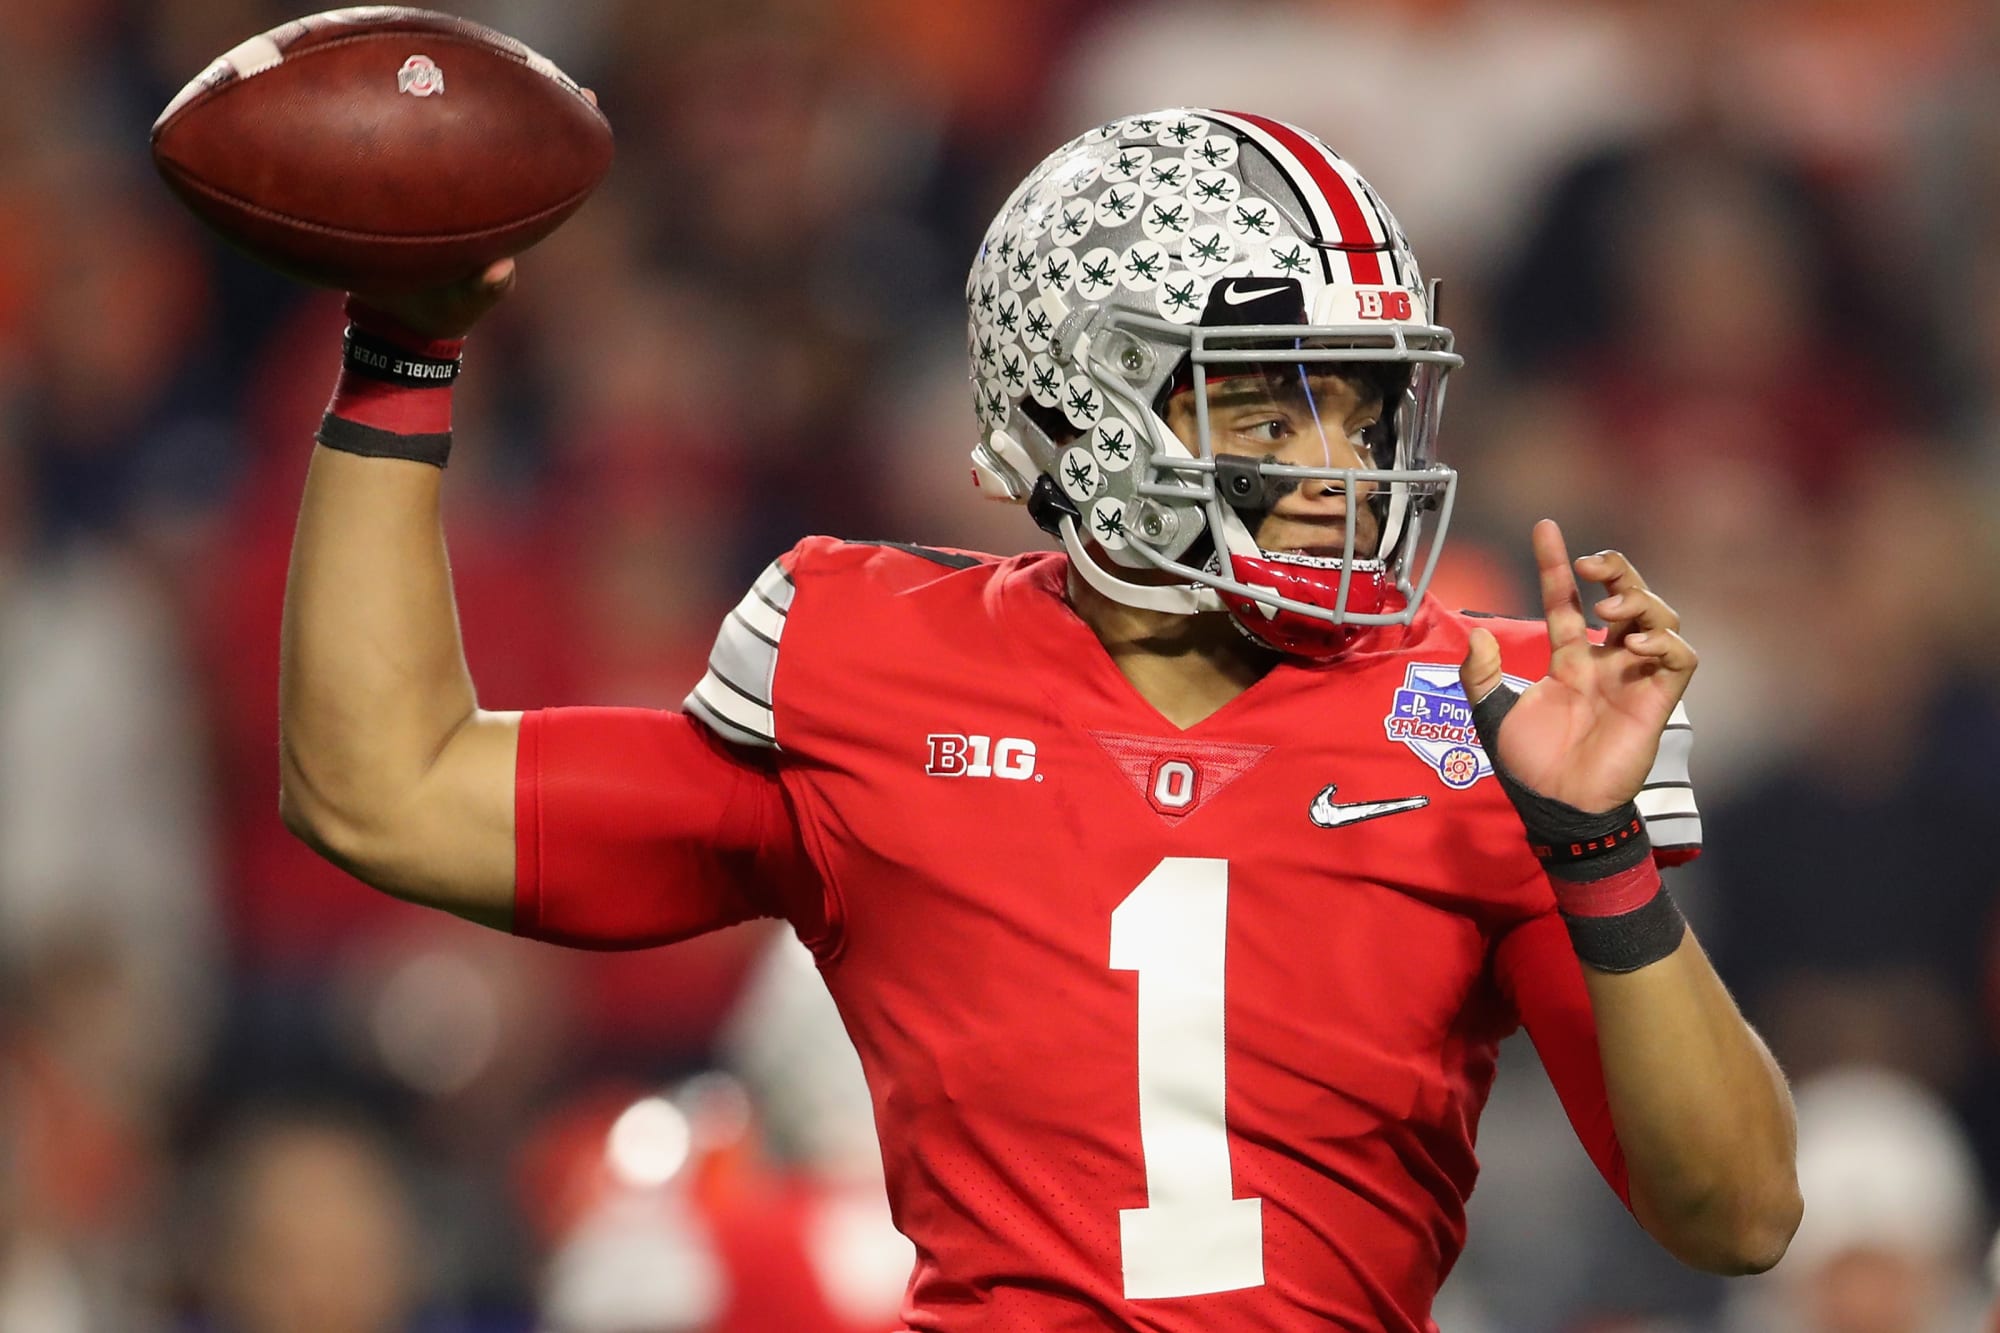 Ohio State football How 2020 will affect 6 top players' draft stock